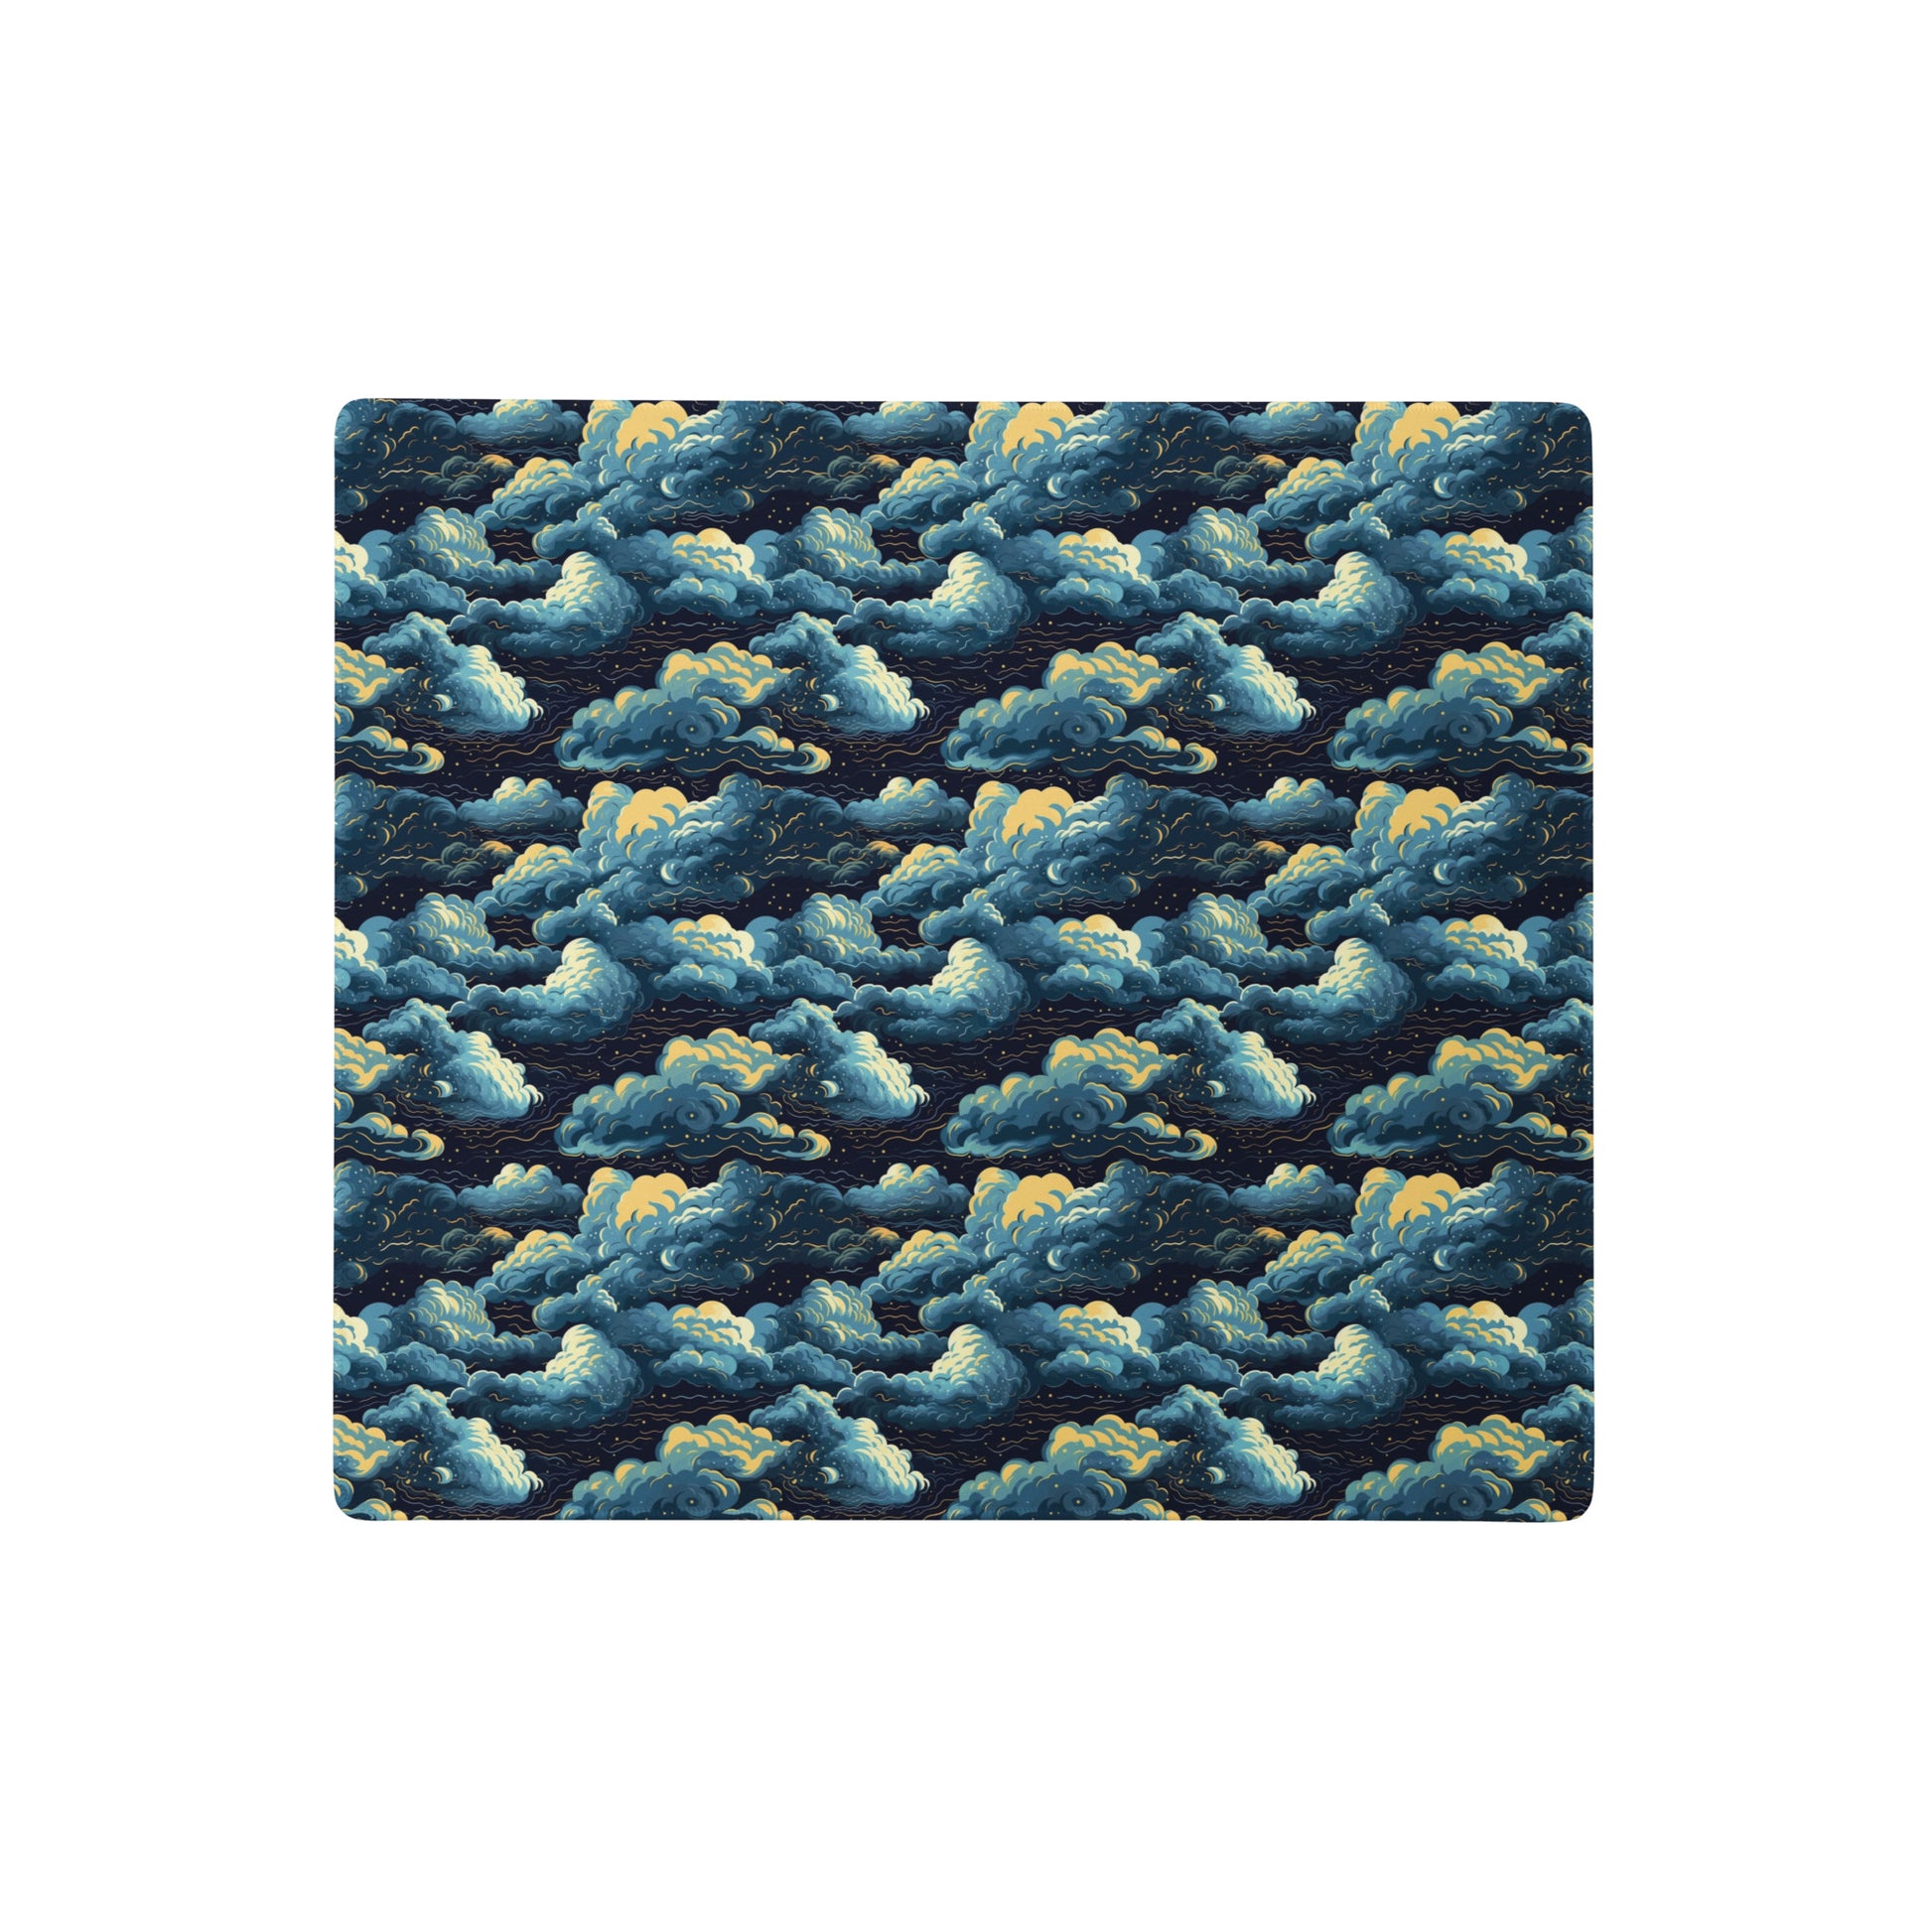 A 18" x 16" desk pad with a cloudy night sky pattern.